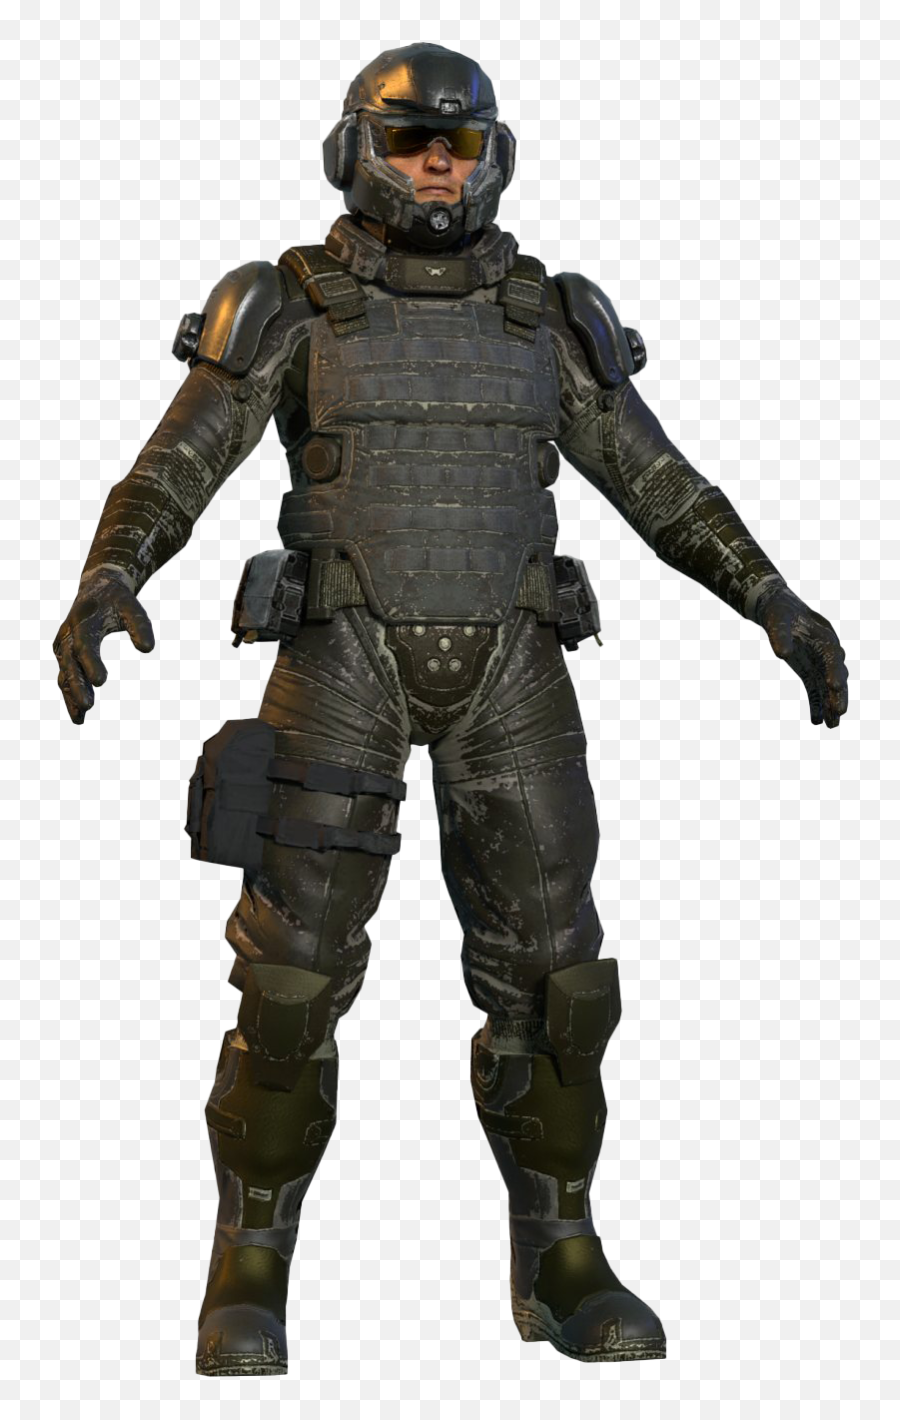 Halo Infinite Png Transparent Images All - Halo 5 Halo Marine Armor,Halo Master Chief Png